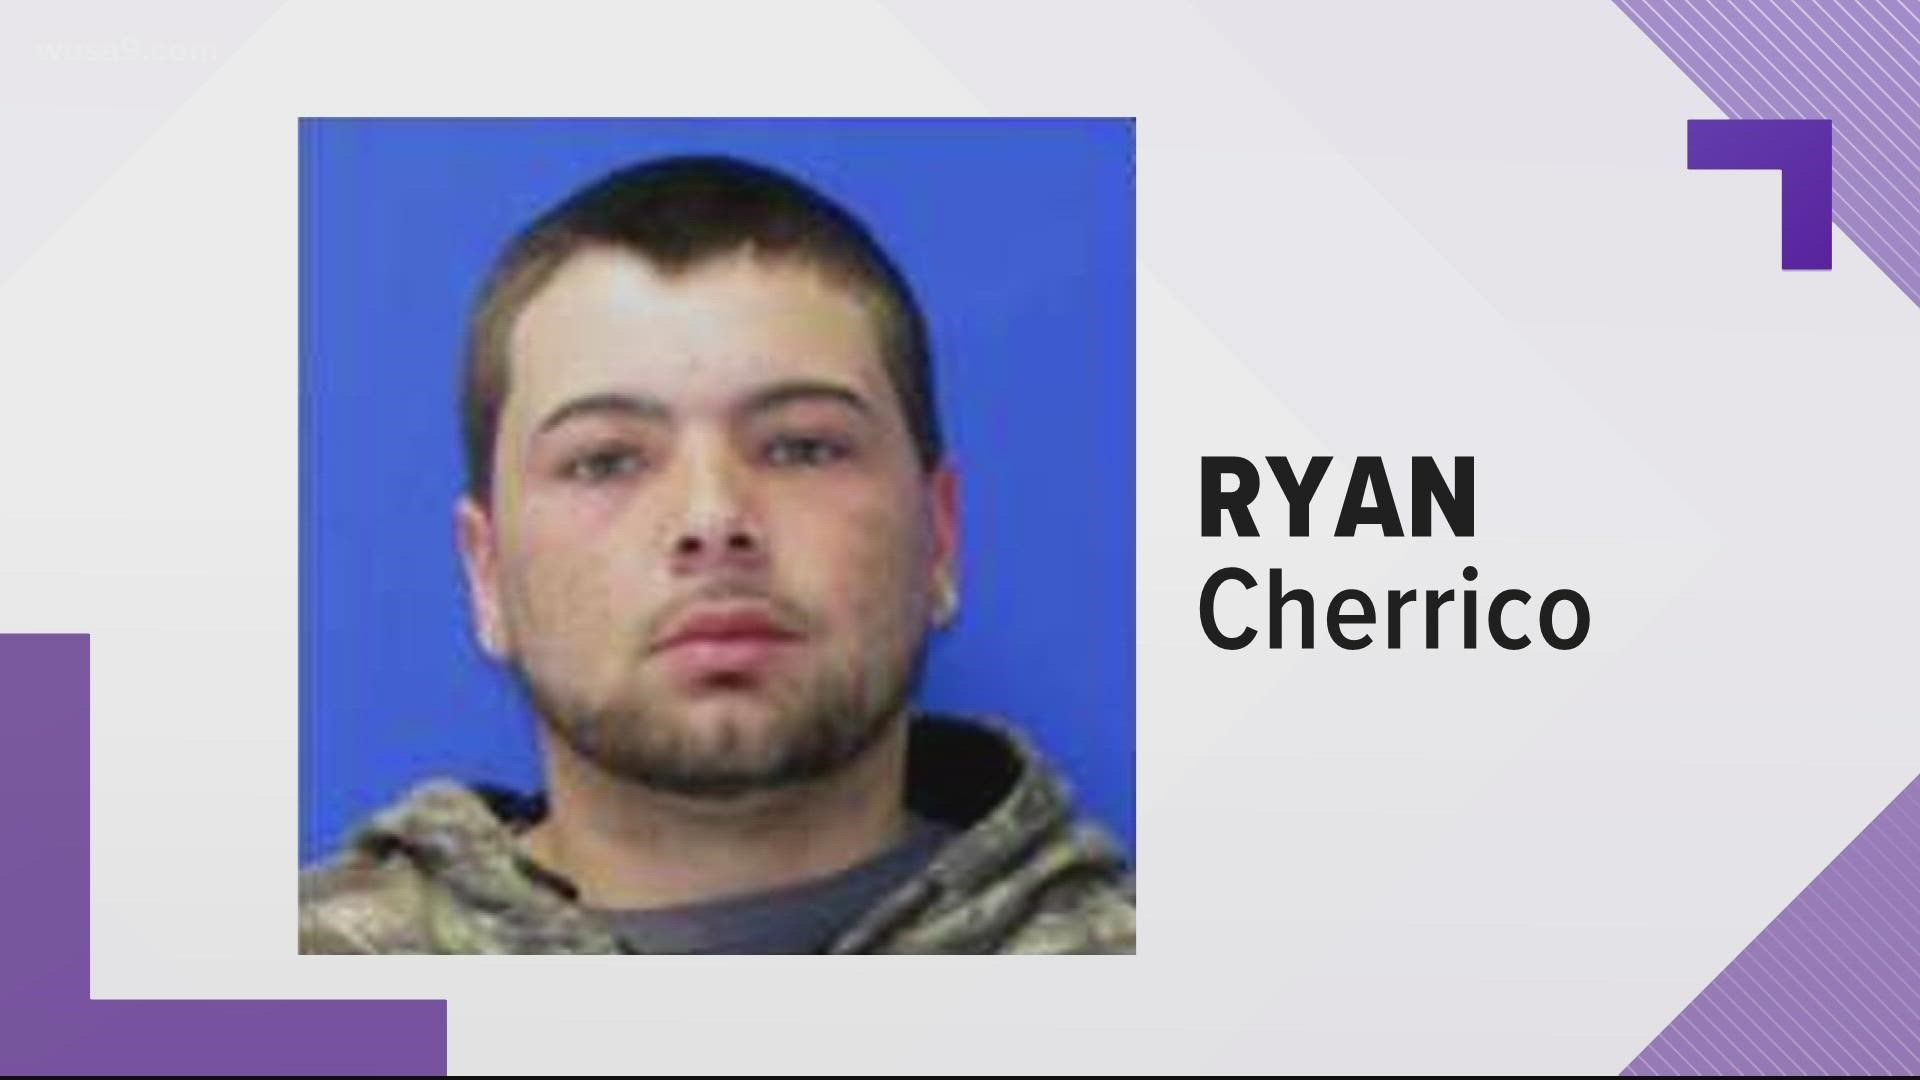 Ryan Cherrico was arrested on 8 charges, including negligent homicide by vehicle under the influence and negligent manslaughter.